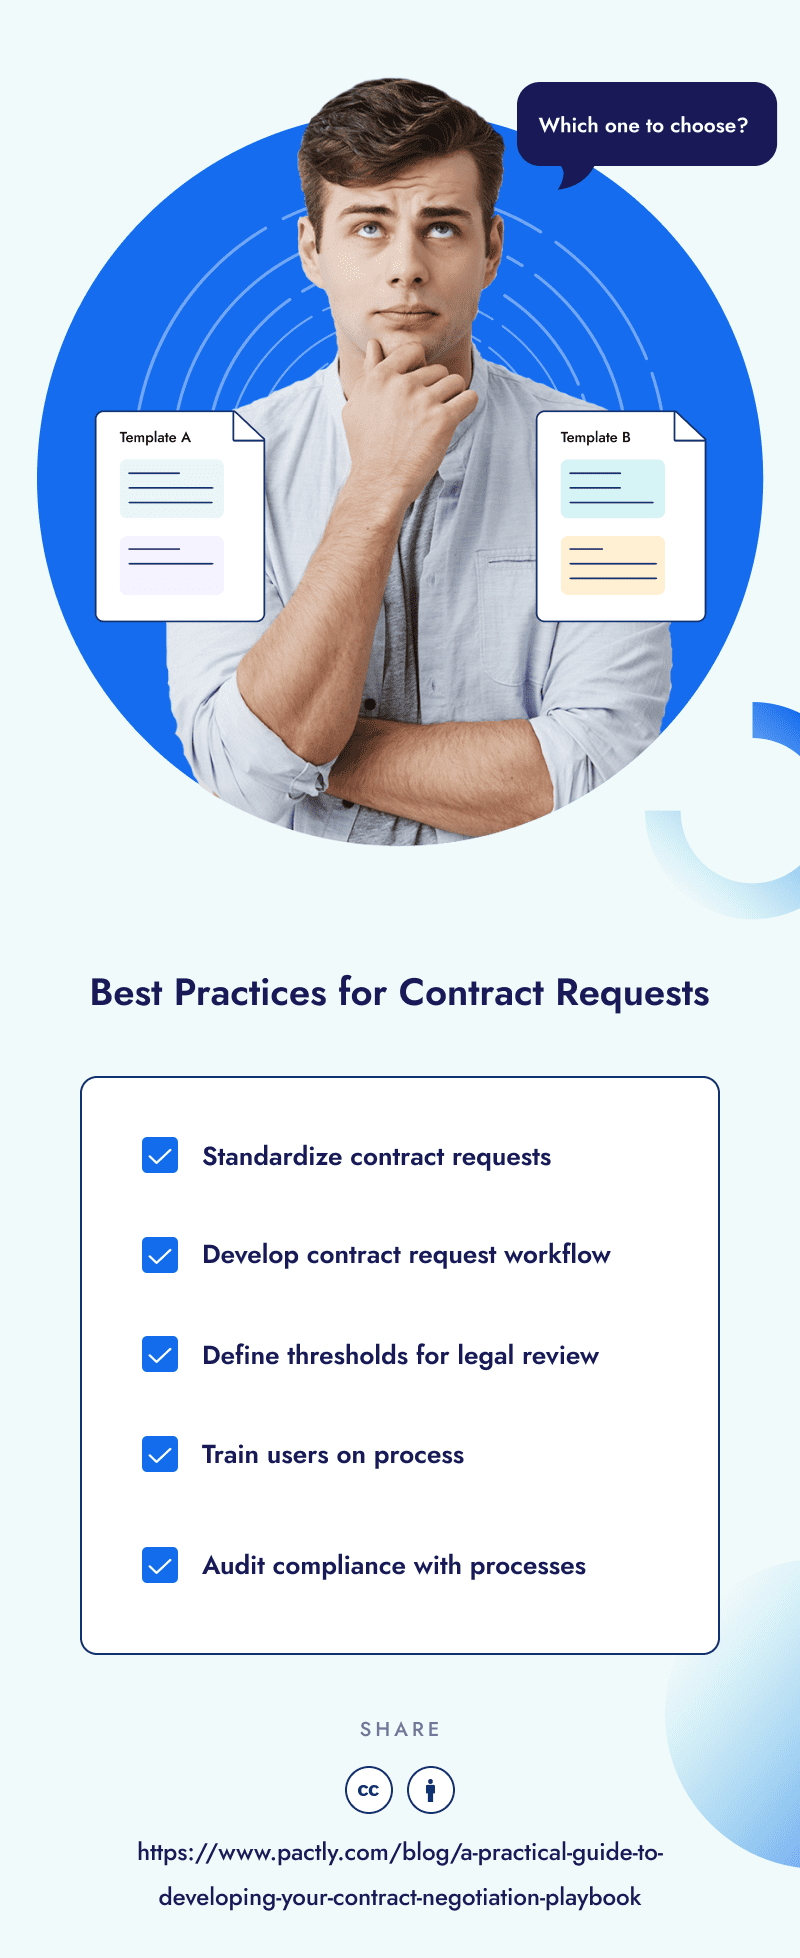 Best practices for contract requests